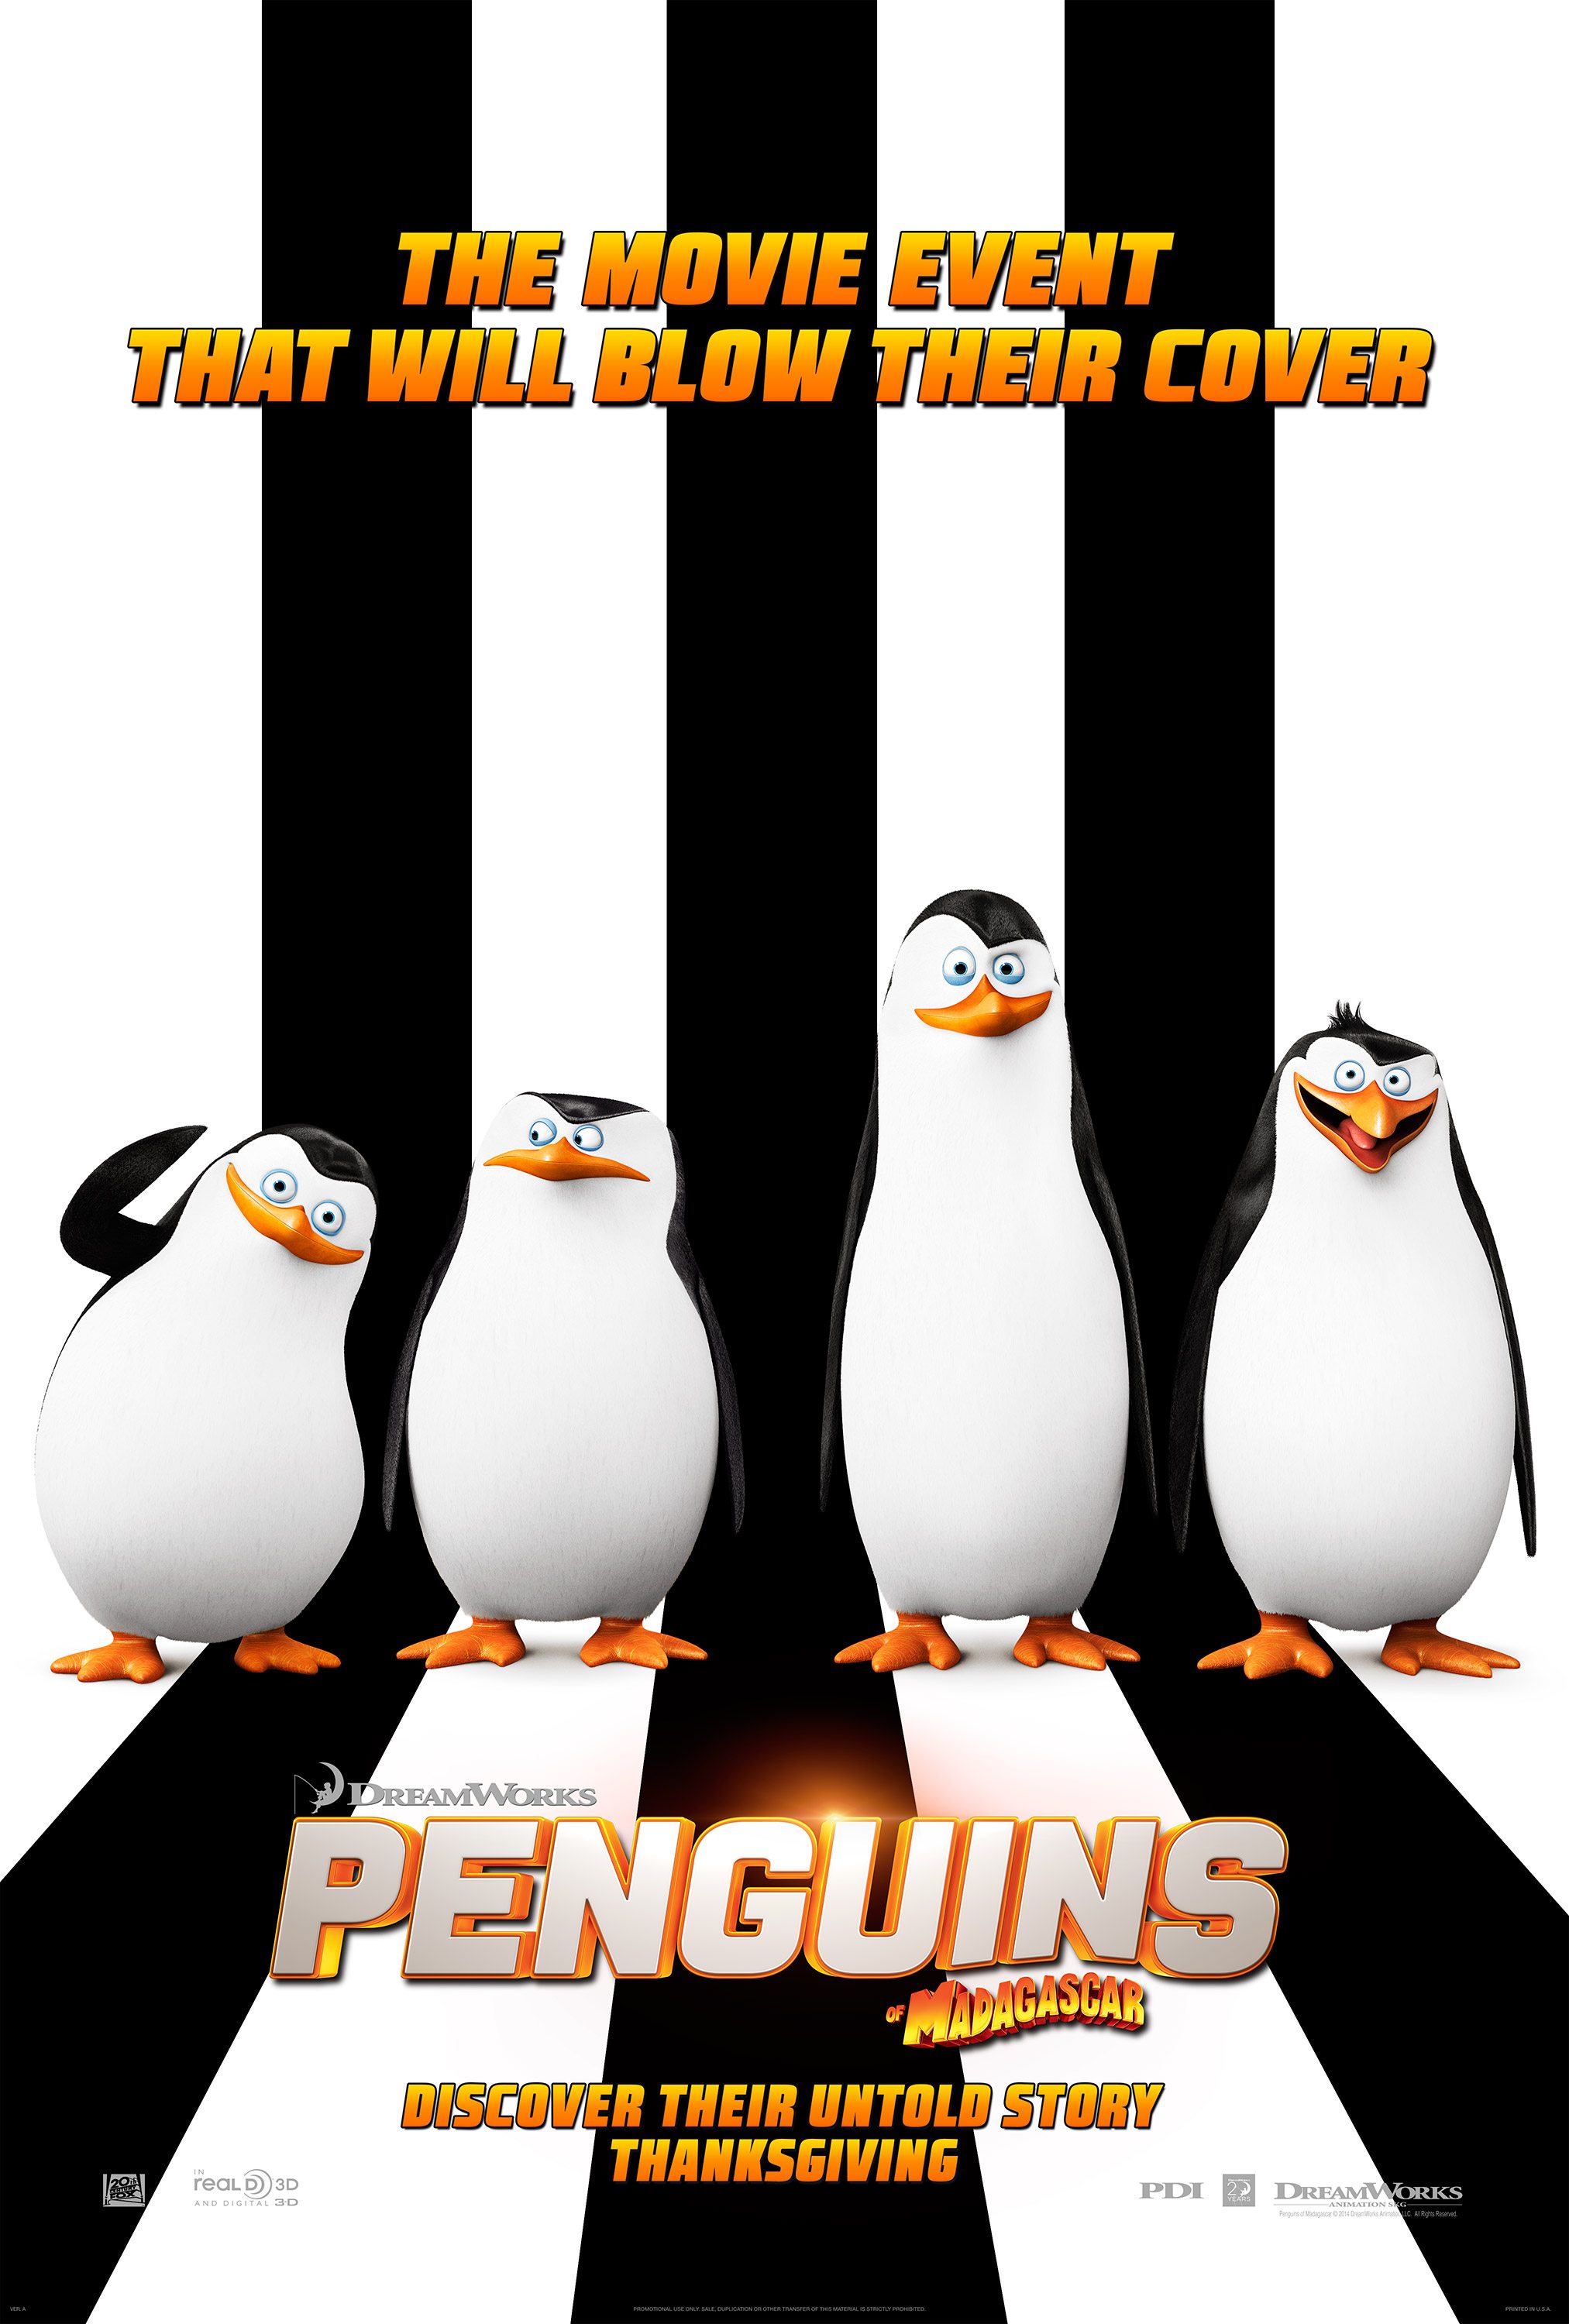 Penguins, Animated and Real, Always Entertaining - GeekDad